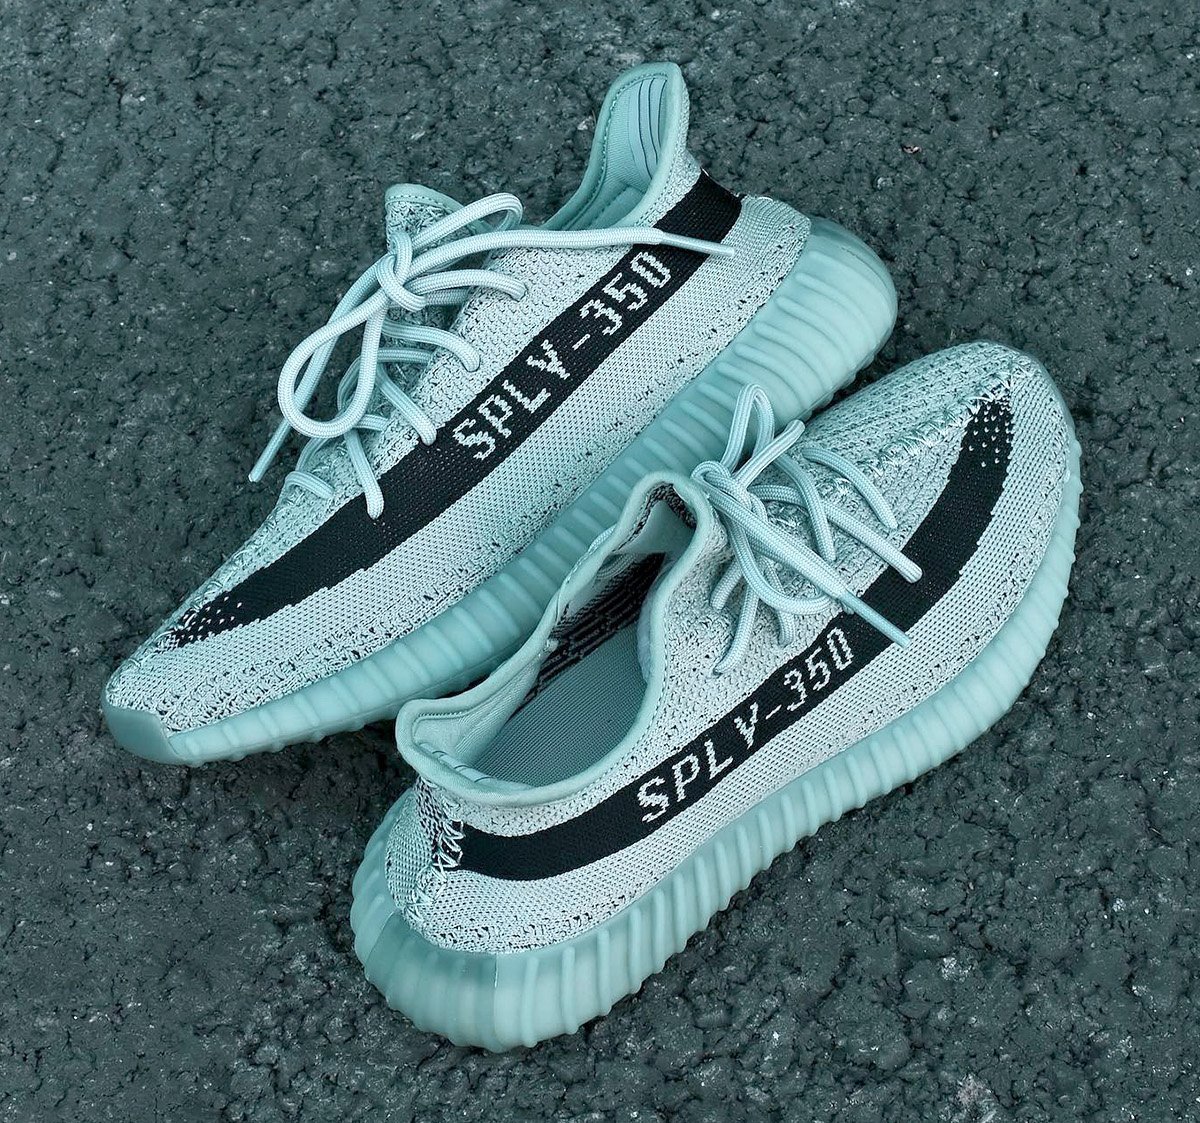 First Look At The Adidas Yeezy Boost 350 V2 